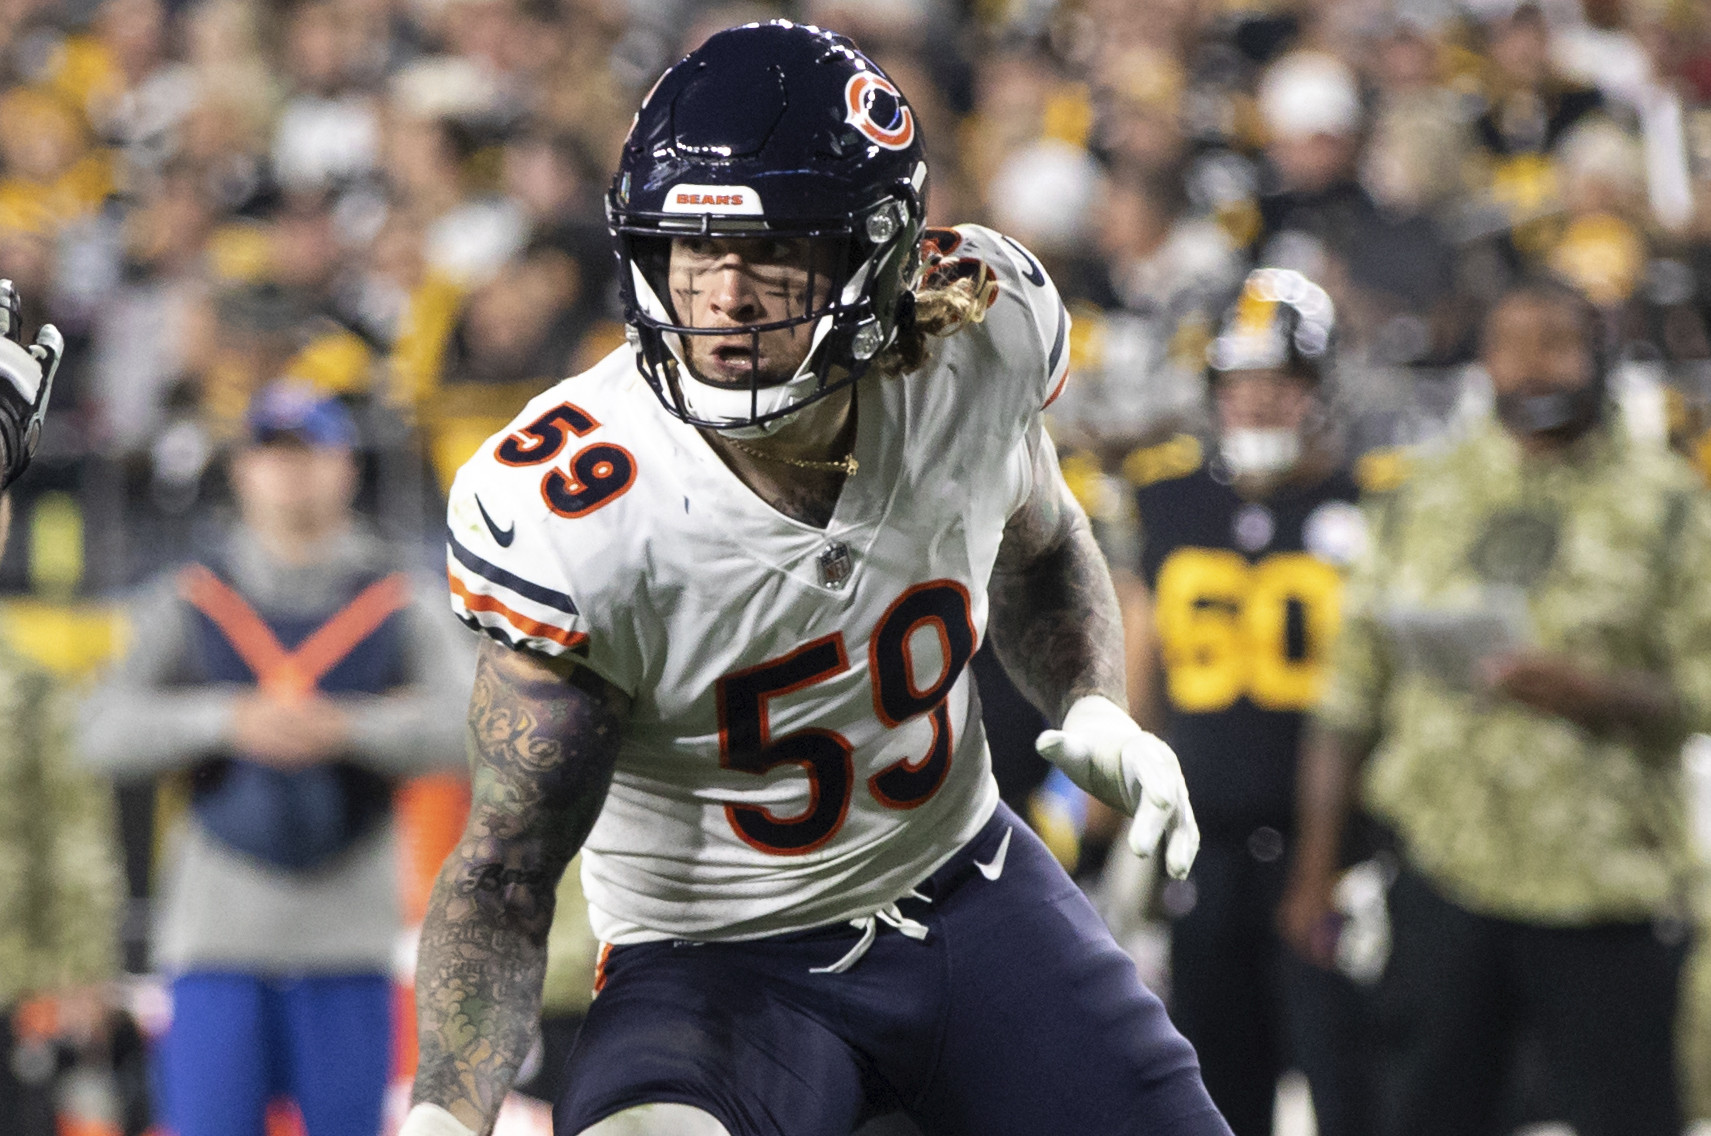 Referee Tony Corrente Discusses Controversial Taunting Call on Bears' Cassius Marsh